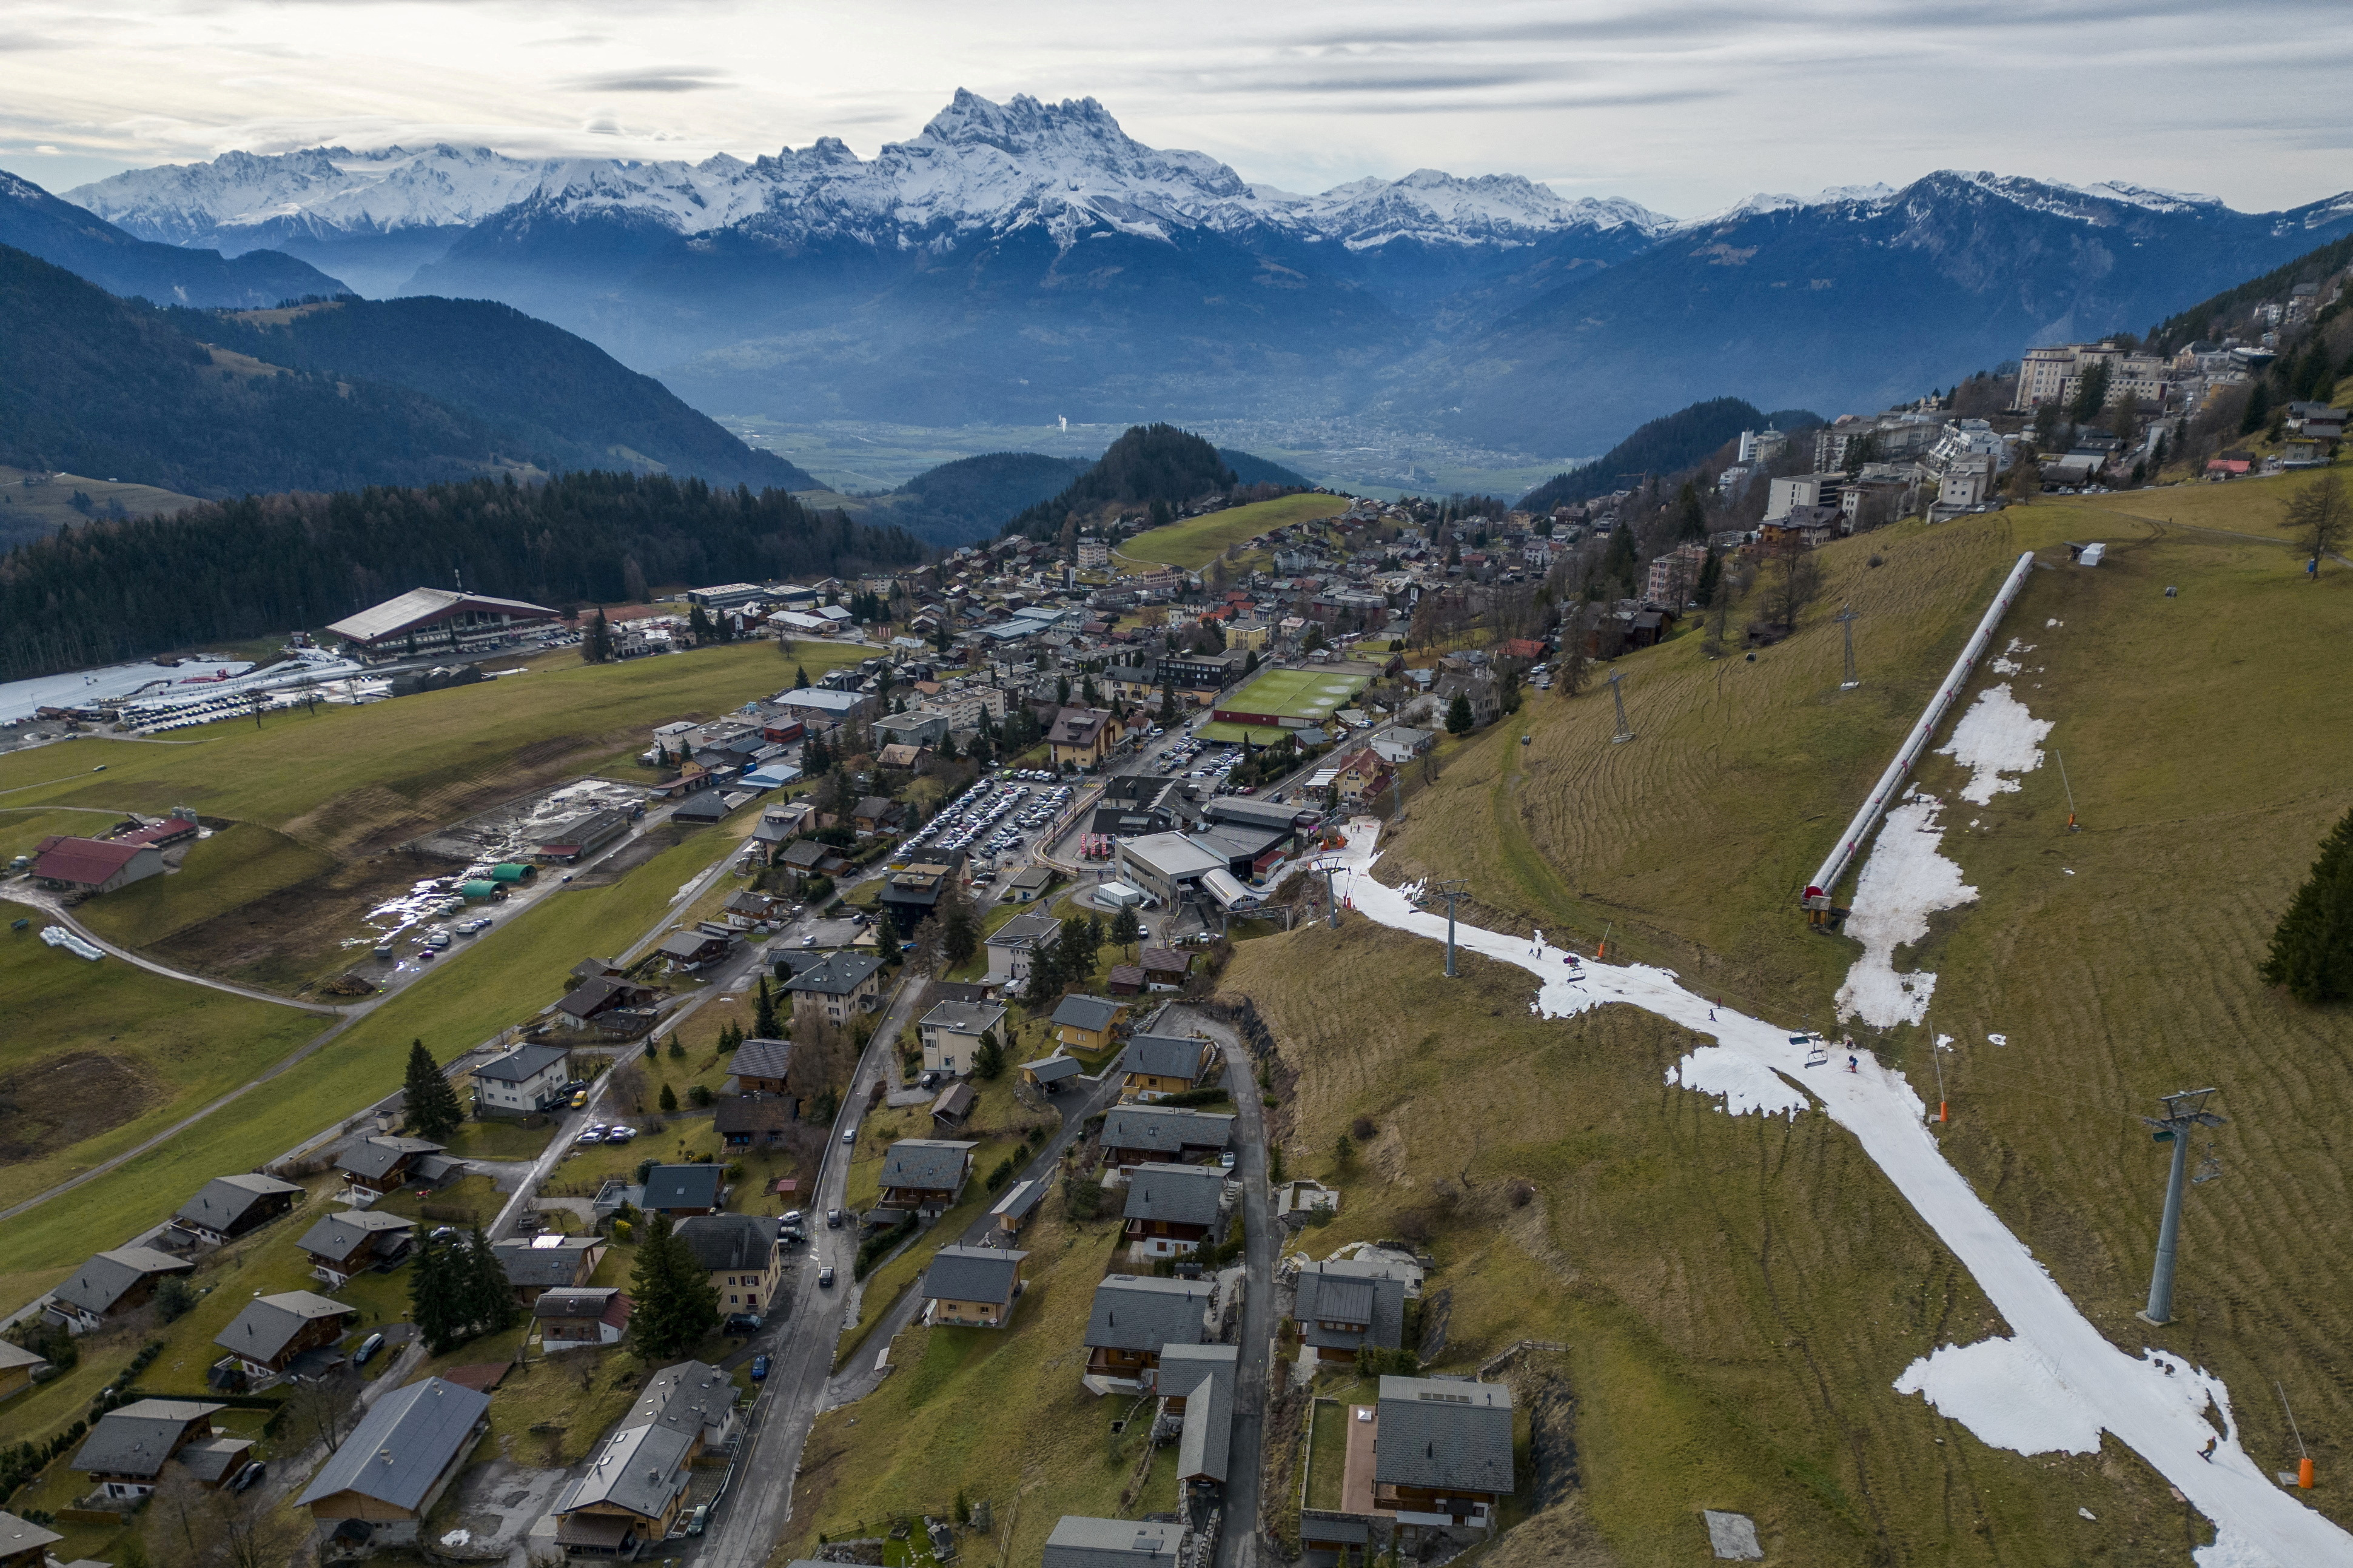 Skiers pass on a small layer of artificial snow in Leysin